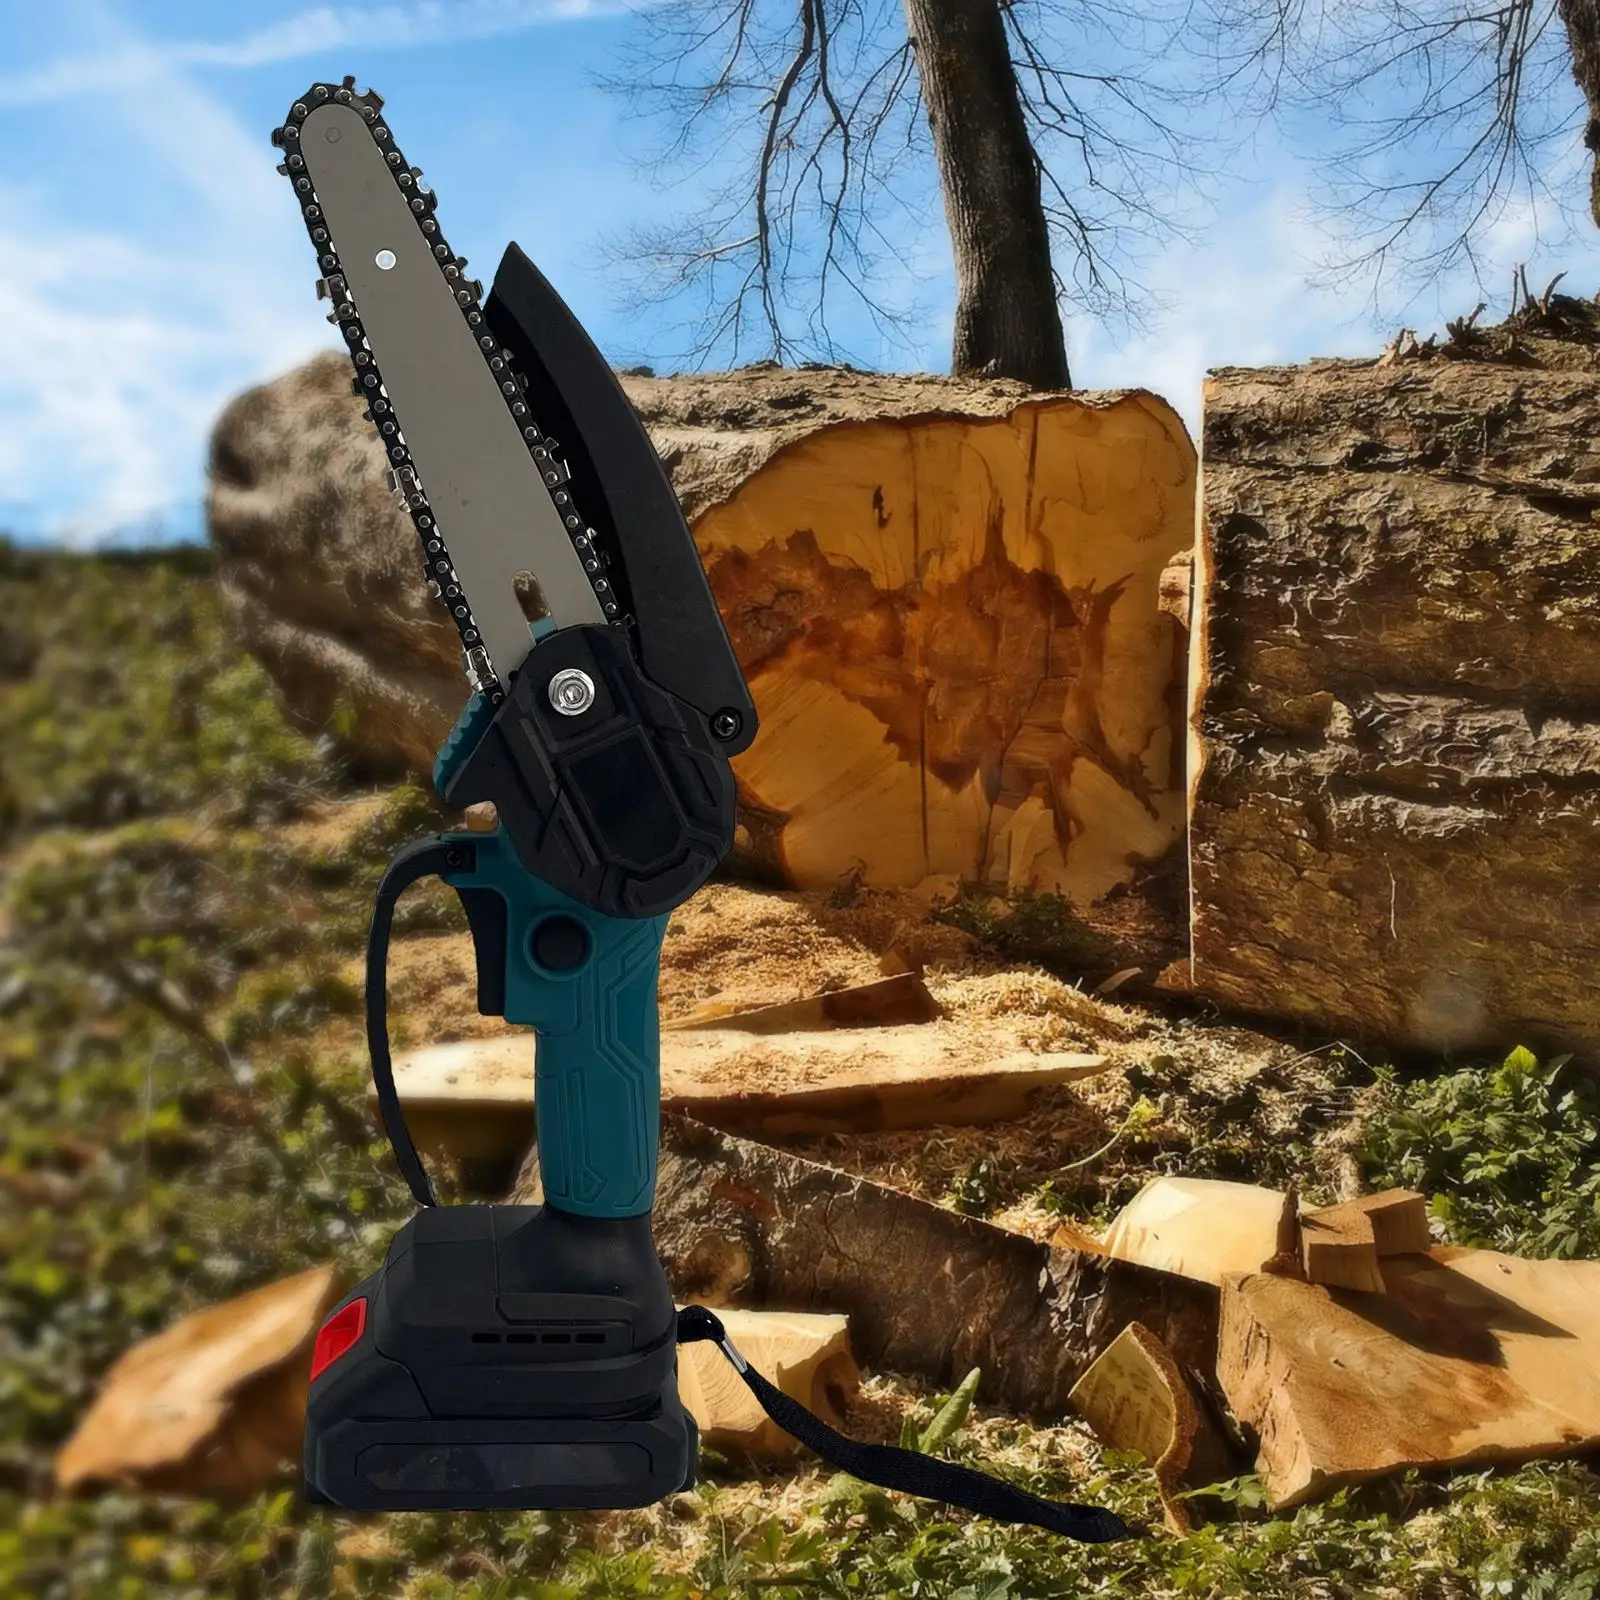 4 Inch 180W One-Handed Mini Pruning Saw Electric Chainsaws Removable For Woodworking Garden Trimming